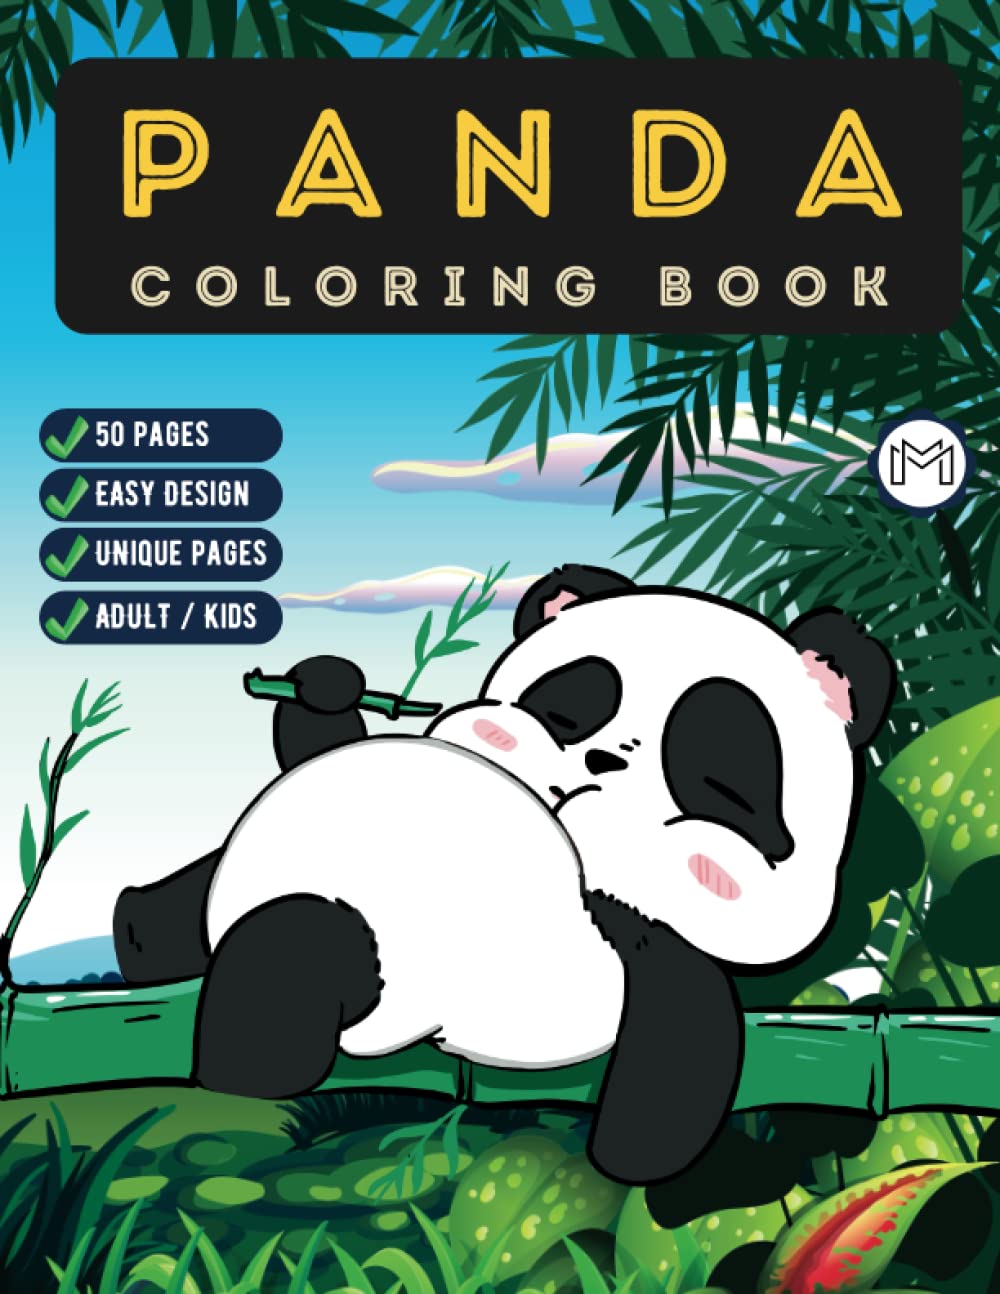 Cute Panda Coloring Book Jungle Animal Coloring Sheets for Kids Teens and Adults Coloring Pages Stress Relief Panda Themed Zoo Wild Animal Coloring